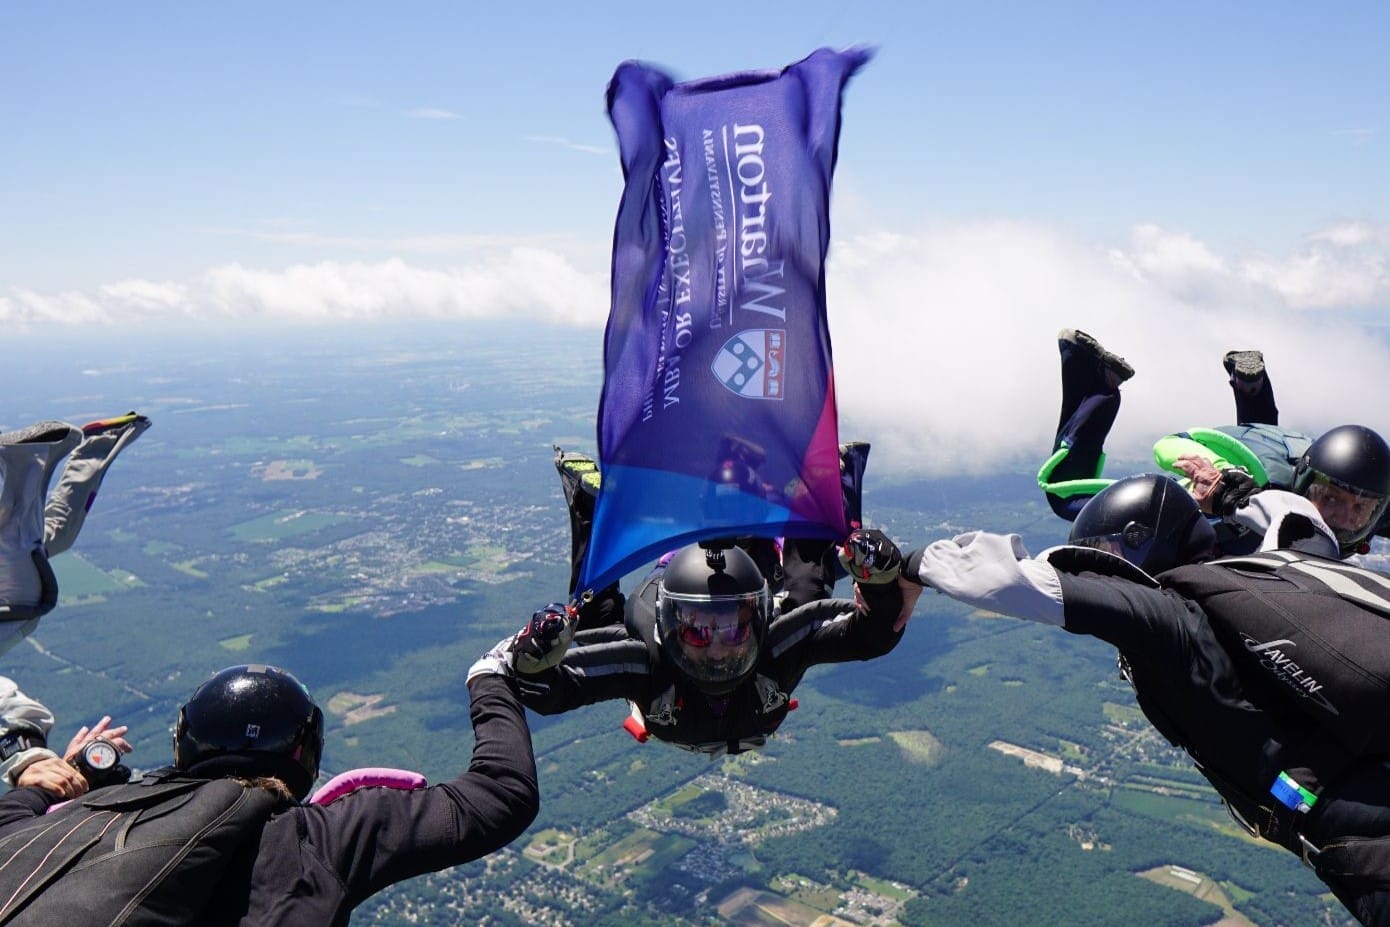 Skydivers float in formation high above the ground, with one skydiver holding up a billowing Wharton flag.